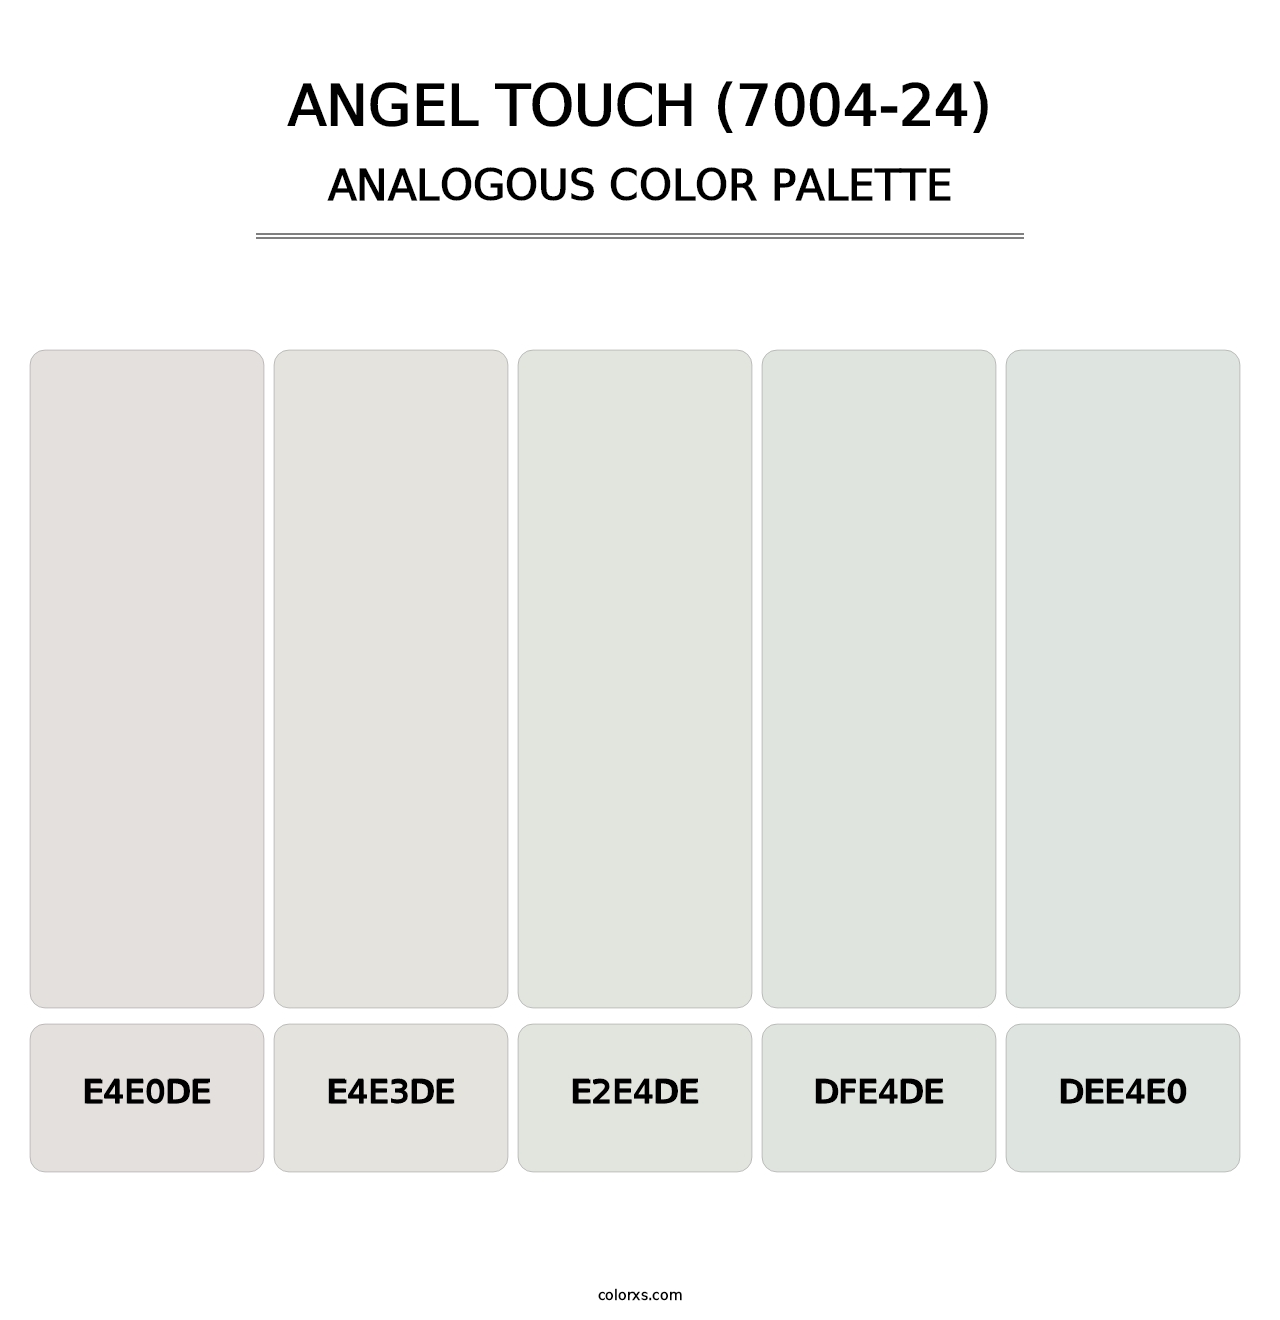 Angel Touch (7004-24) - Analogous Color Palette